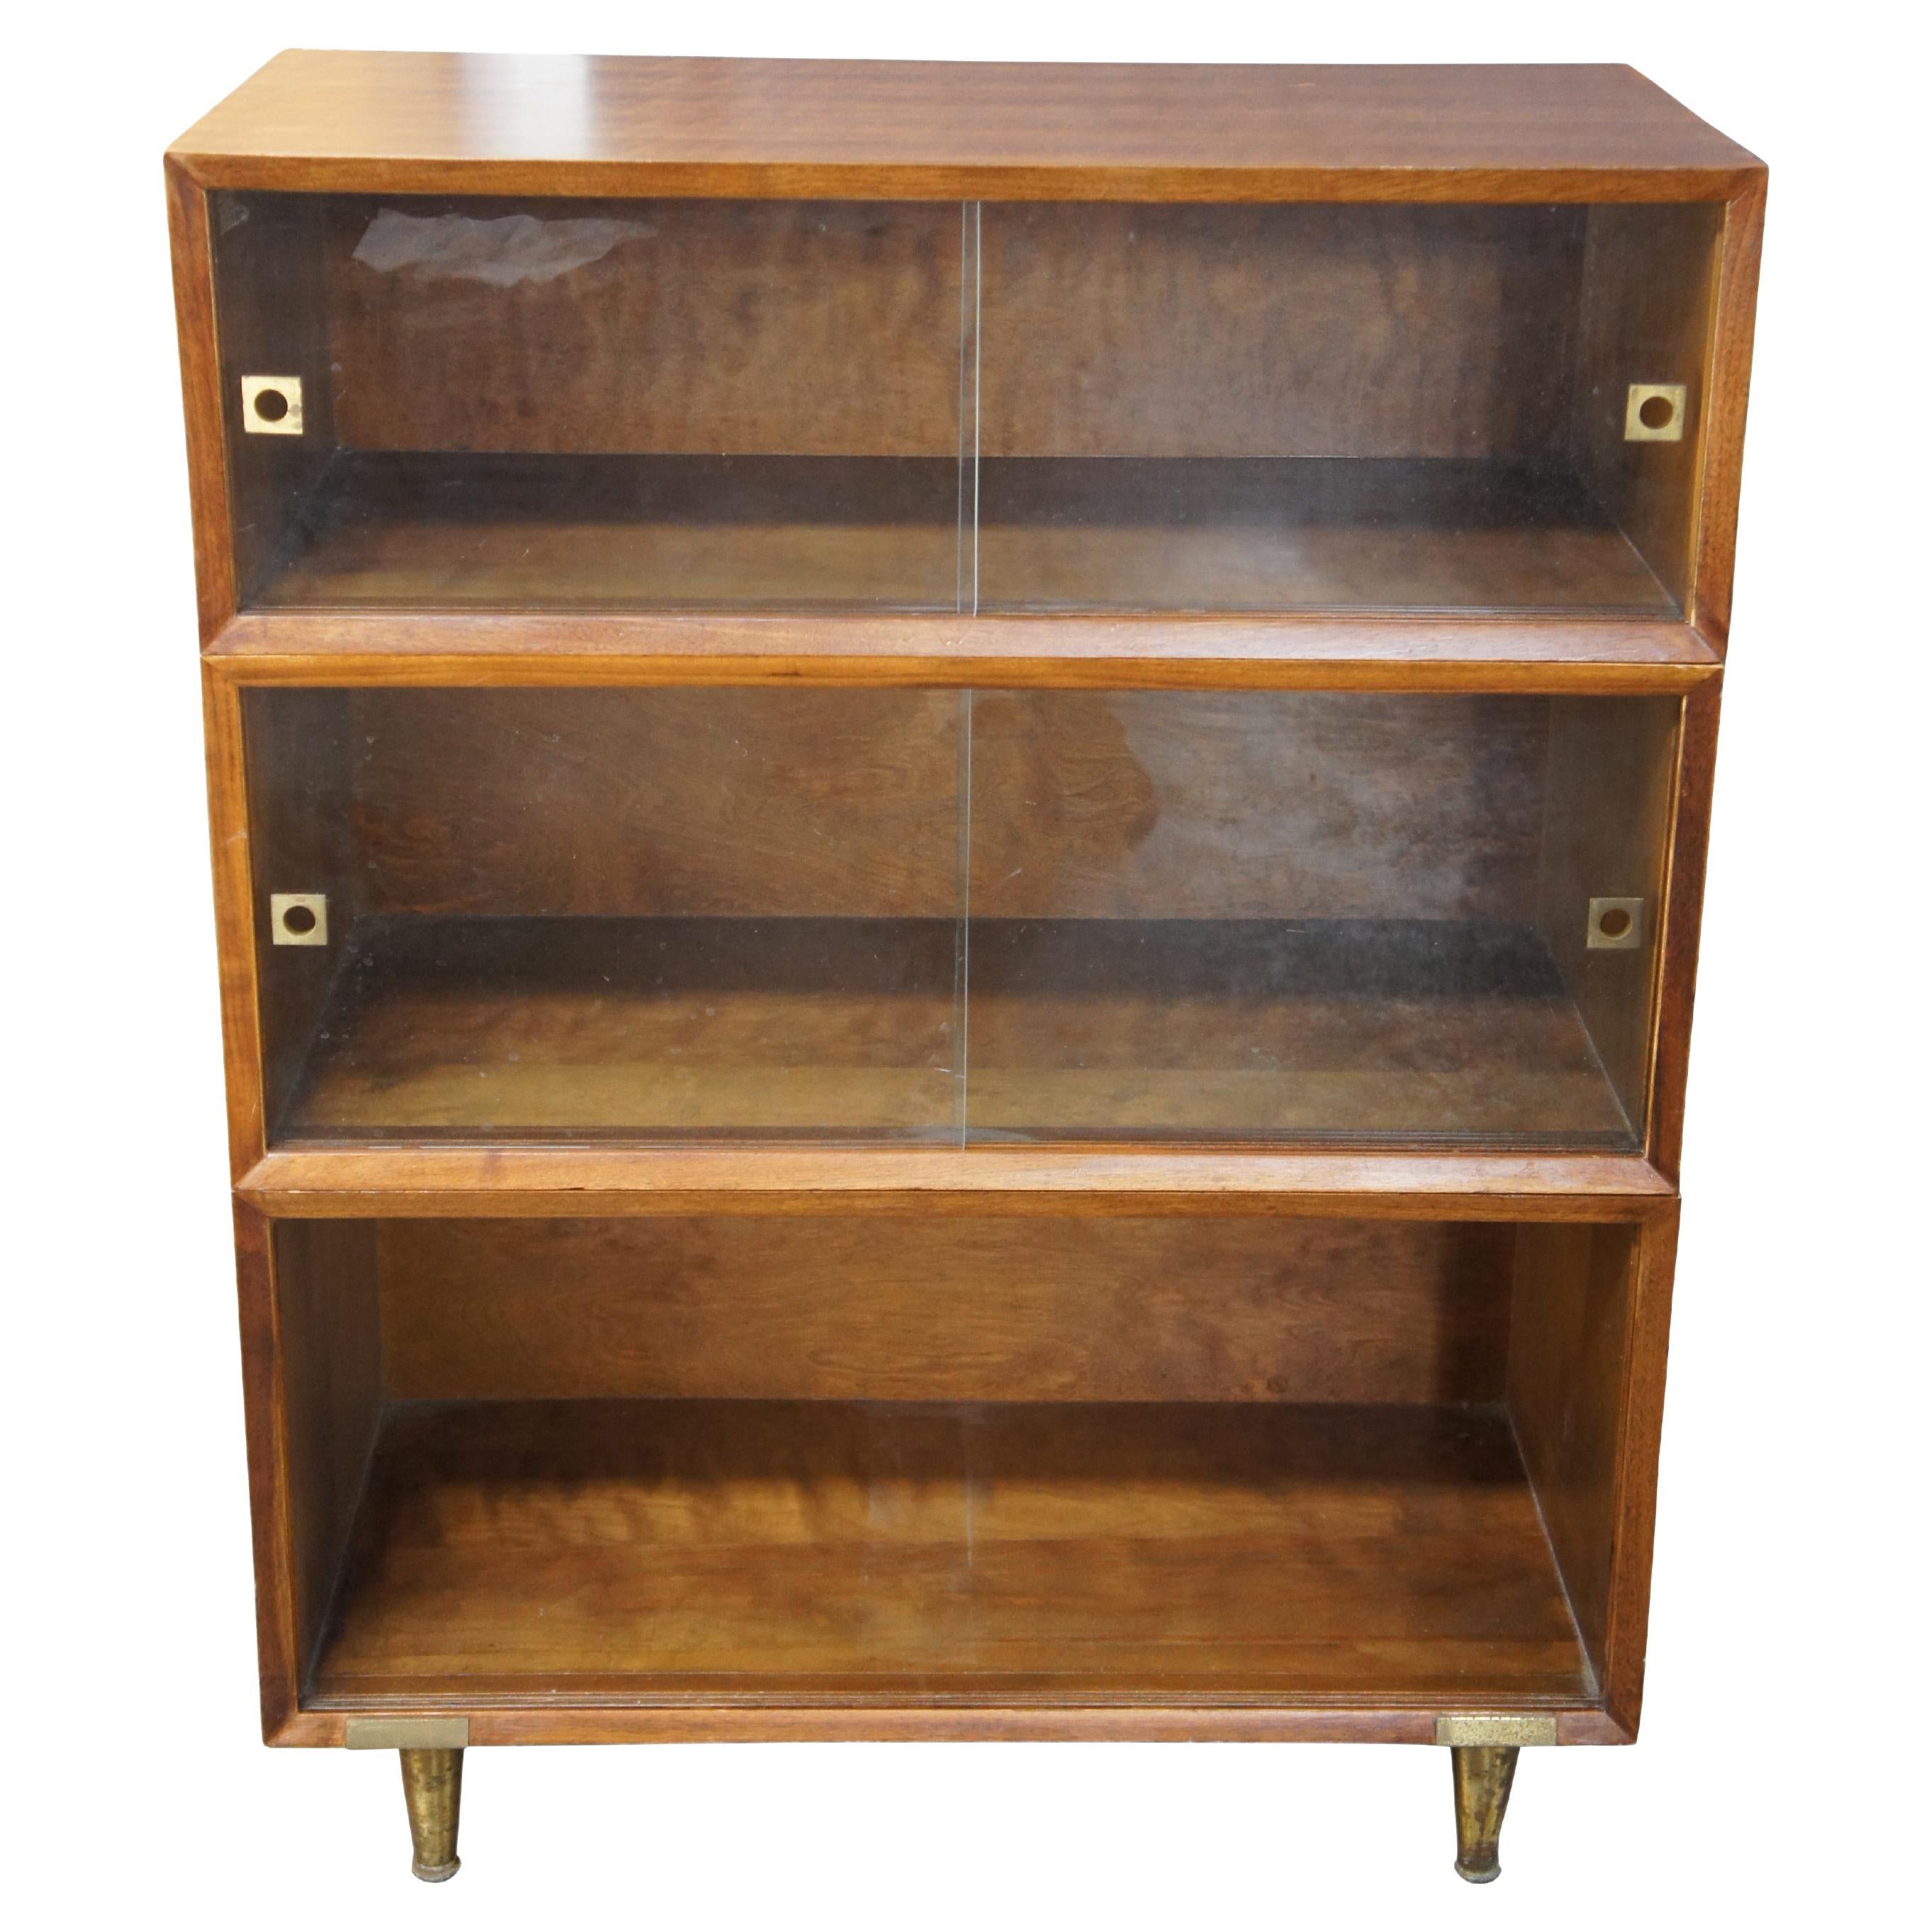 Hale Walnut Barrister Style Stacked Bookcase Display Cabinet Mid Century Modern en vente